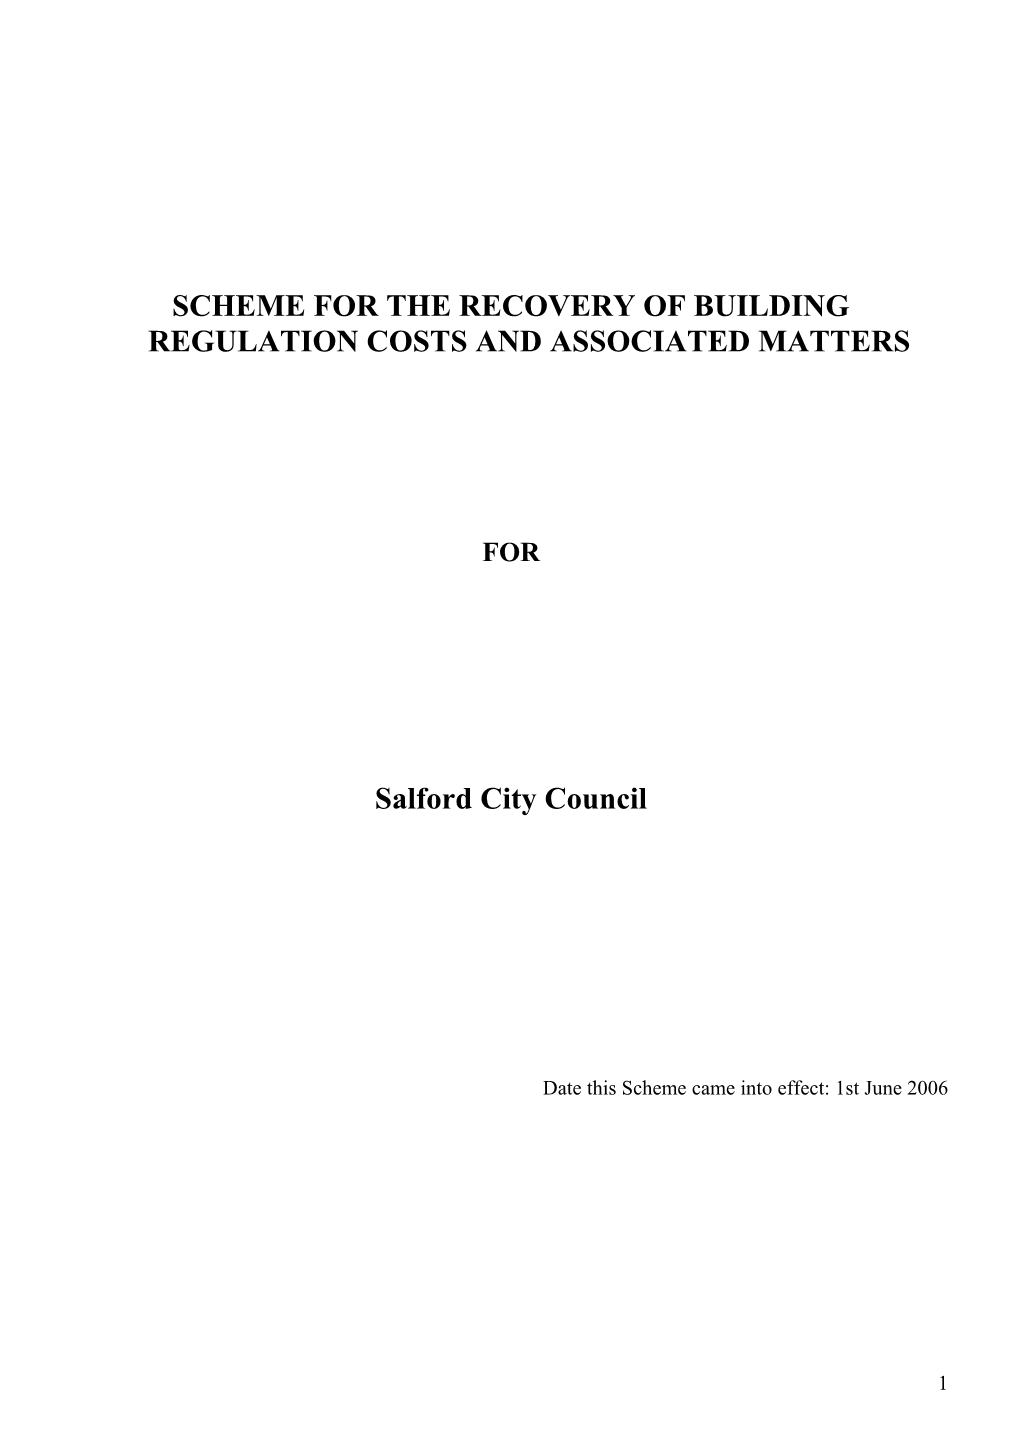 Scheme for the Recovery of Buildingregulation Costs and Associated Matters